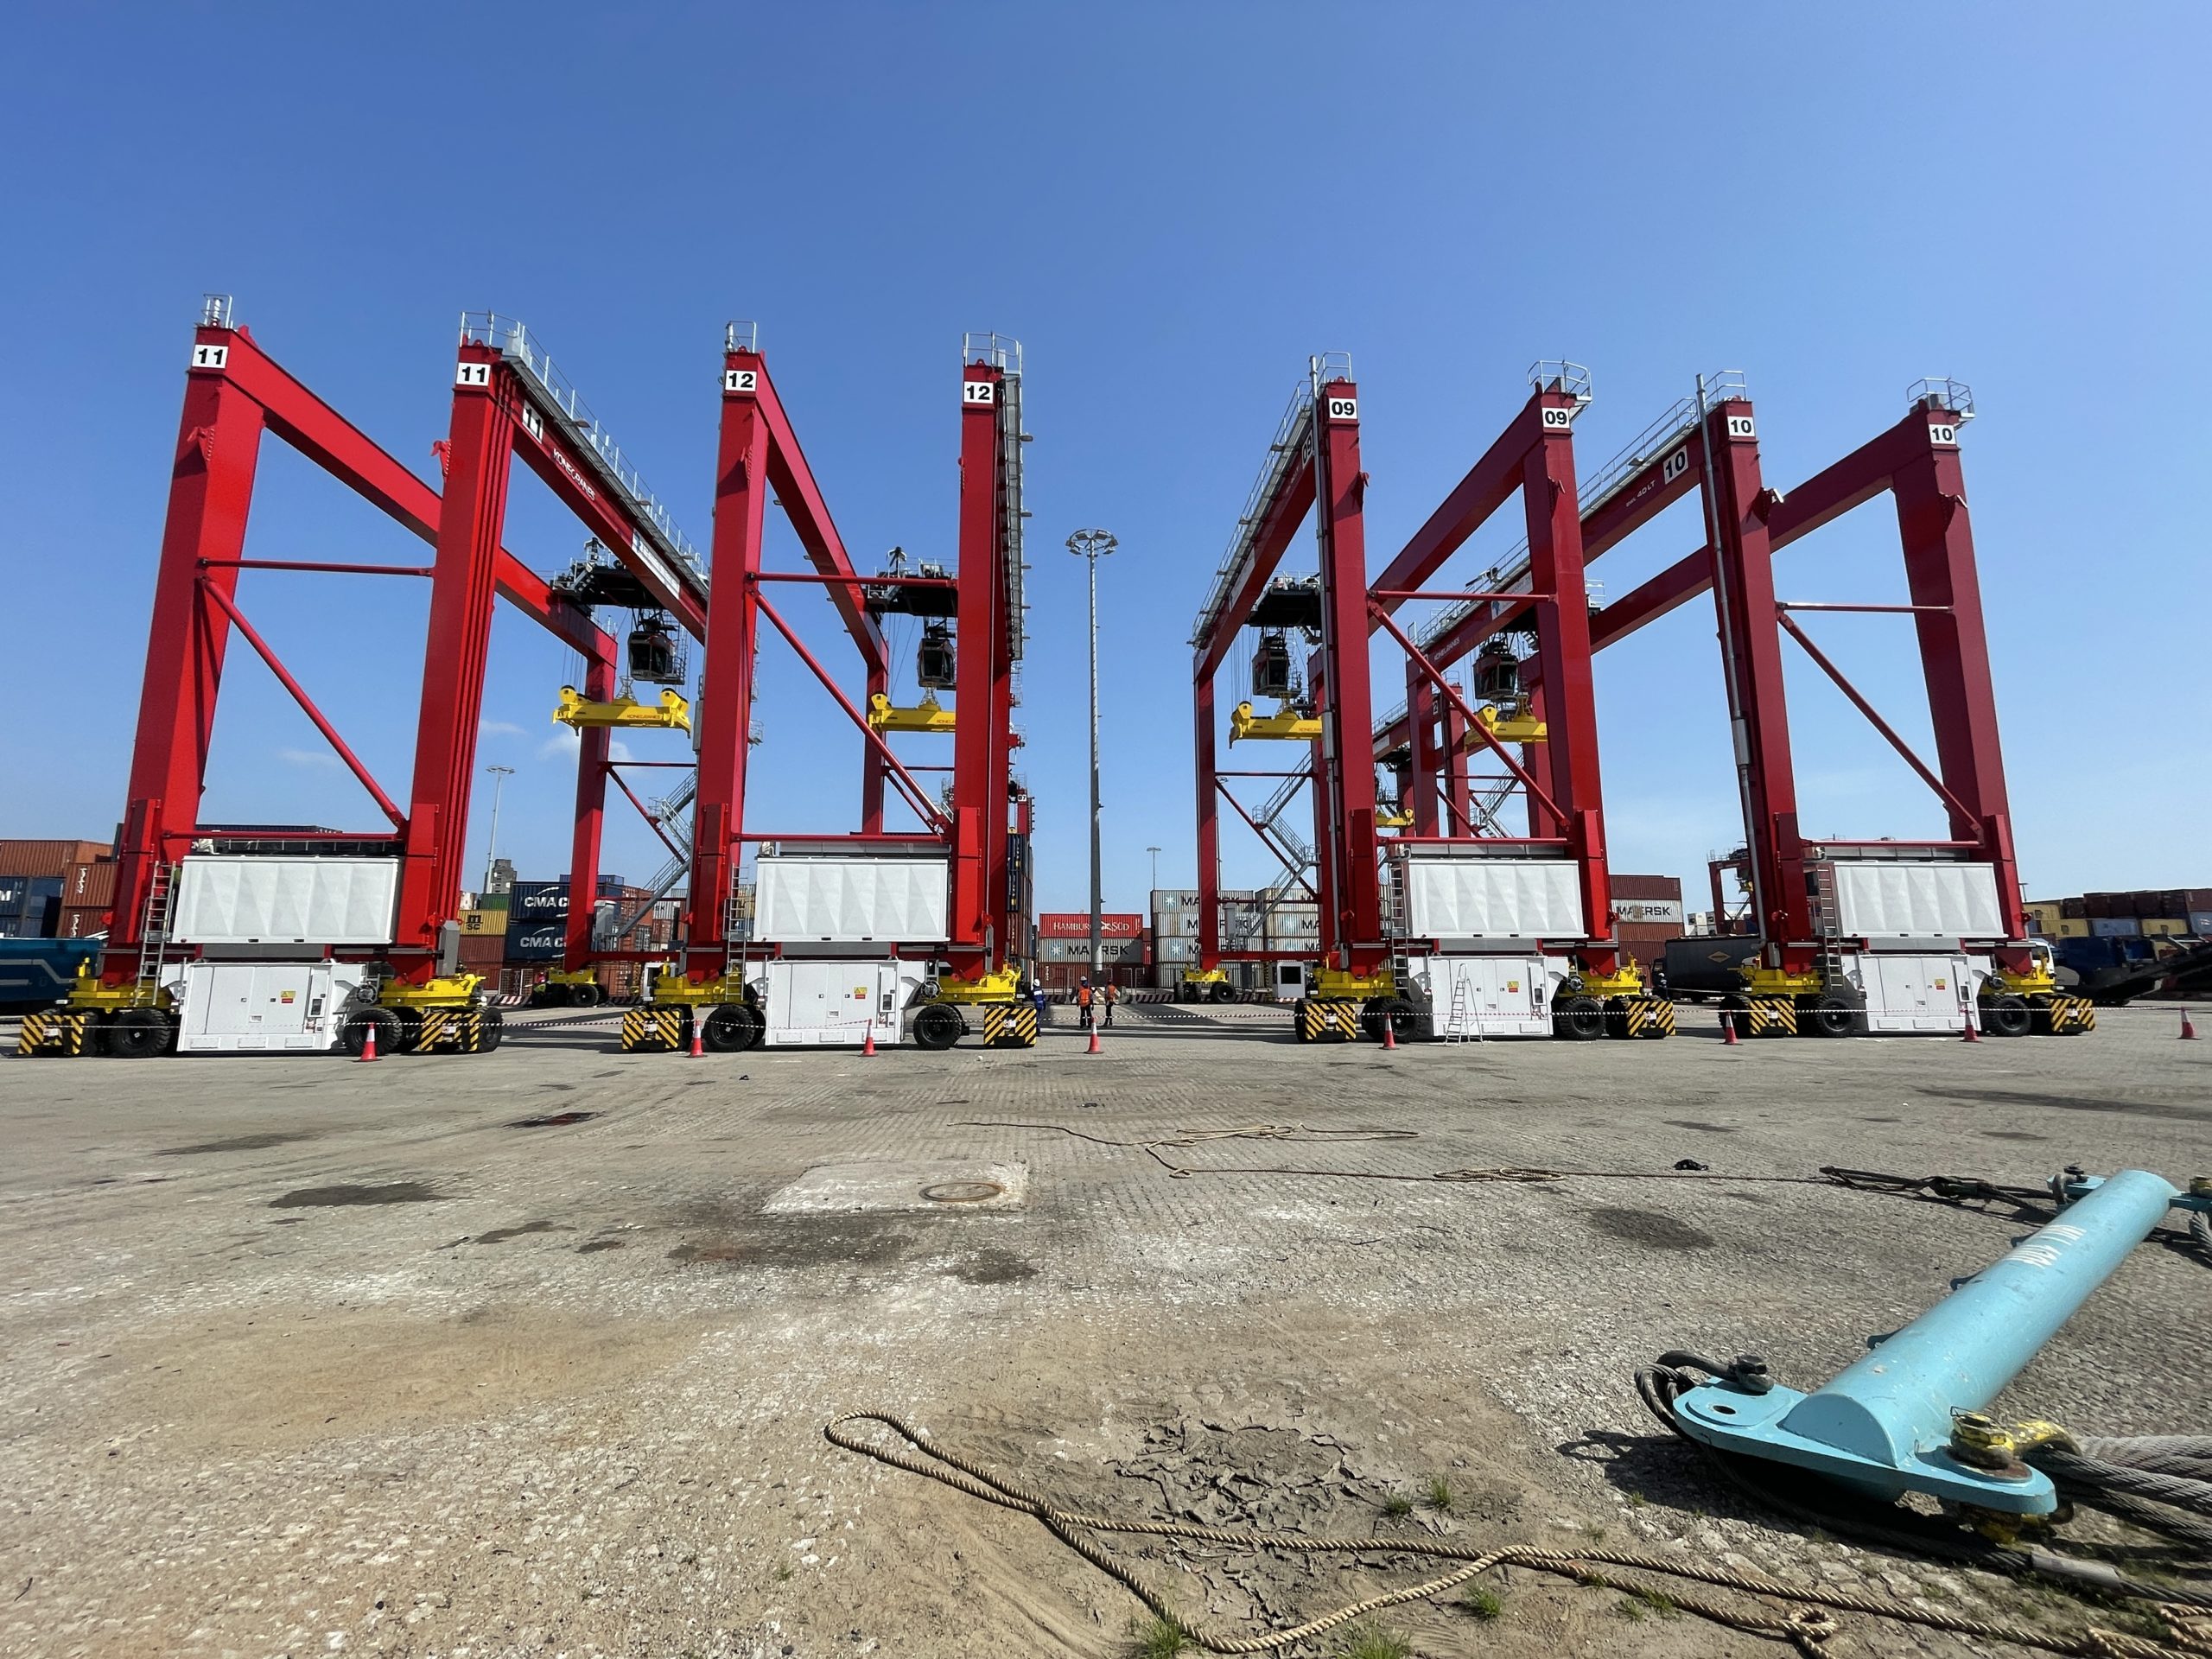 These 4 x Konecranes RTGs have a lifting capacity of 40 tons each and specialise in handling containers in port terminals